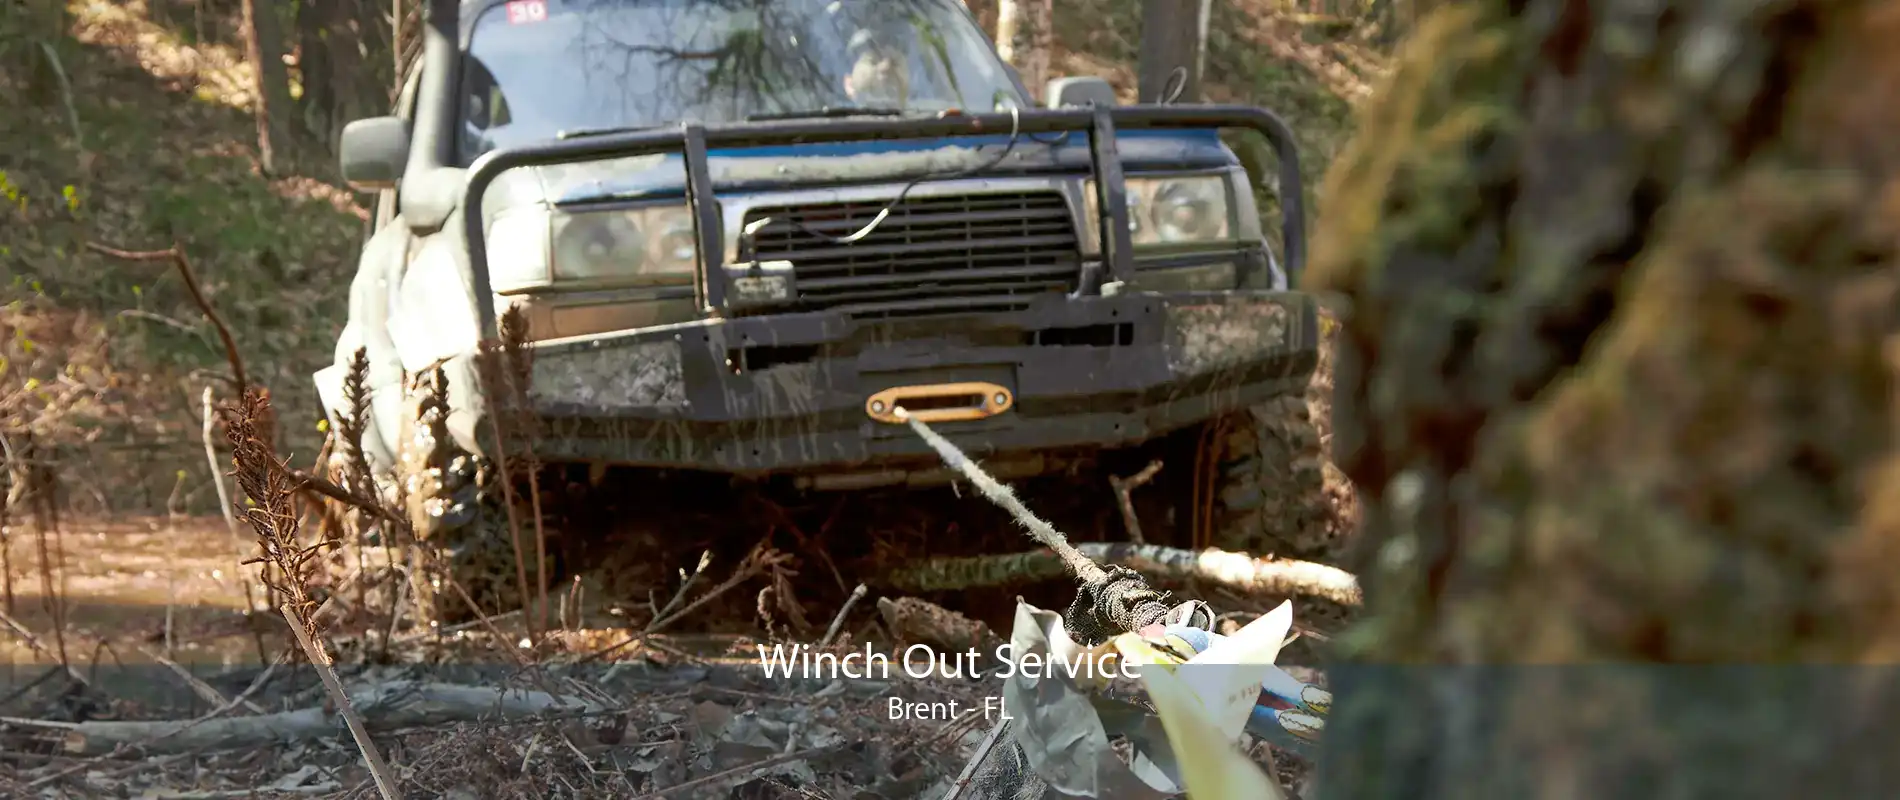 Winch Out Service Brent - FL